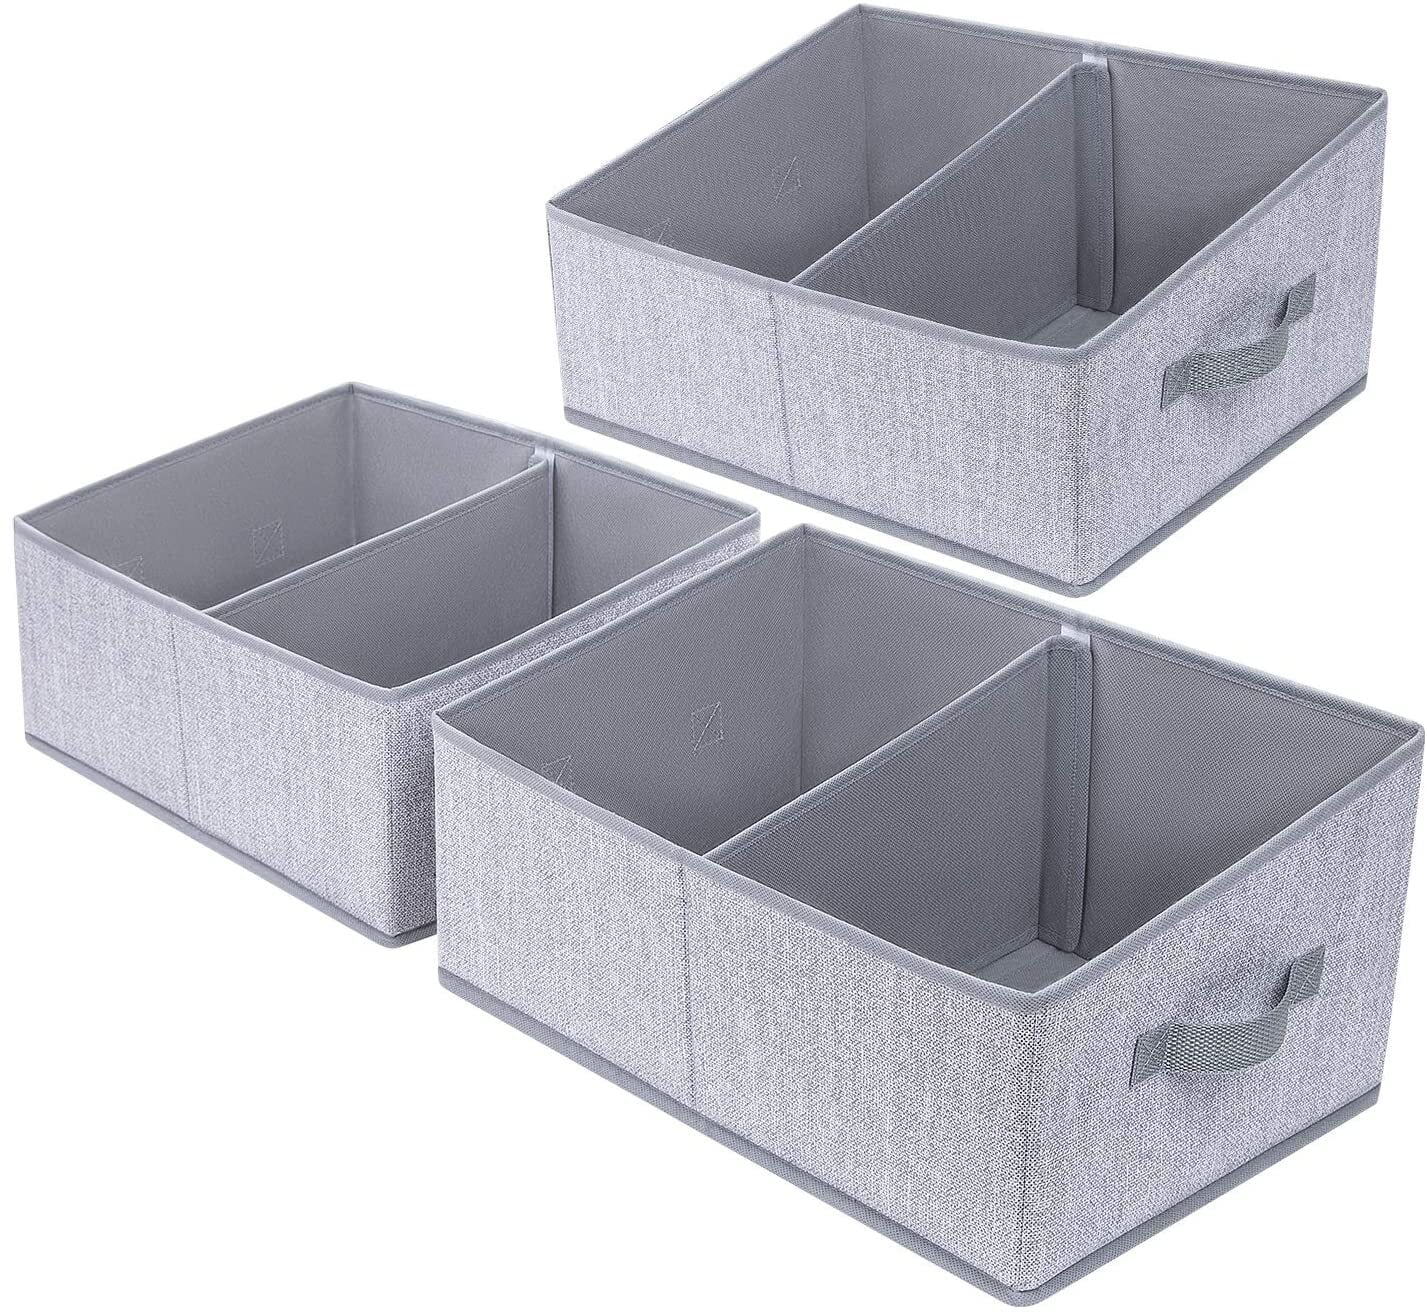 DIMJ Closet Organizer Storage Bins, 6 Pcs Fabric Storage Containers Cube  Trapezoid Organizer Basket for Bedroom Bathroom Cloth, Baby Toiletry, Toys,  Towel, DVD, Book, Home Organization, Gray 